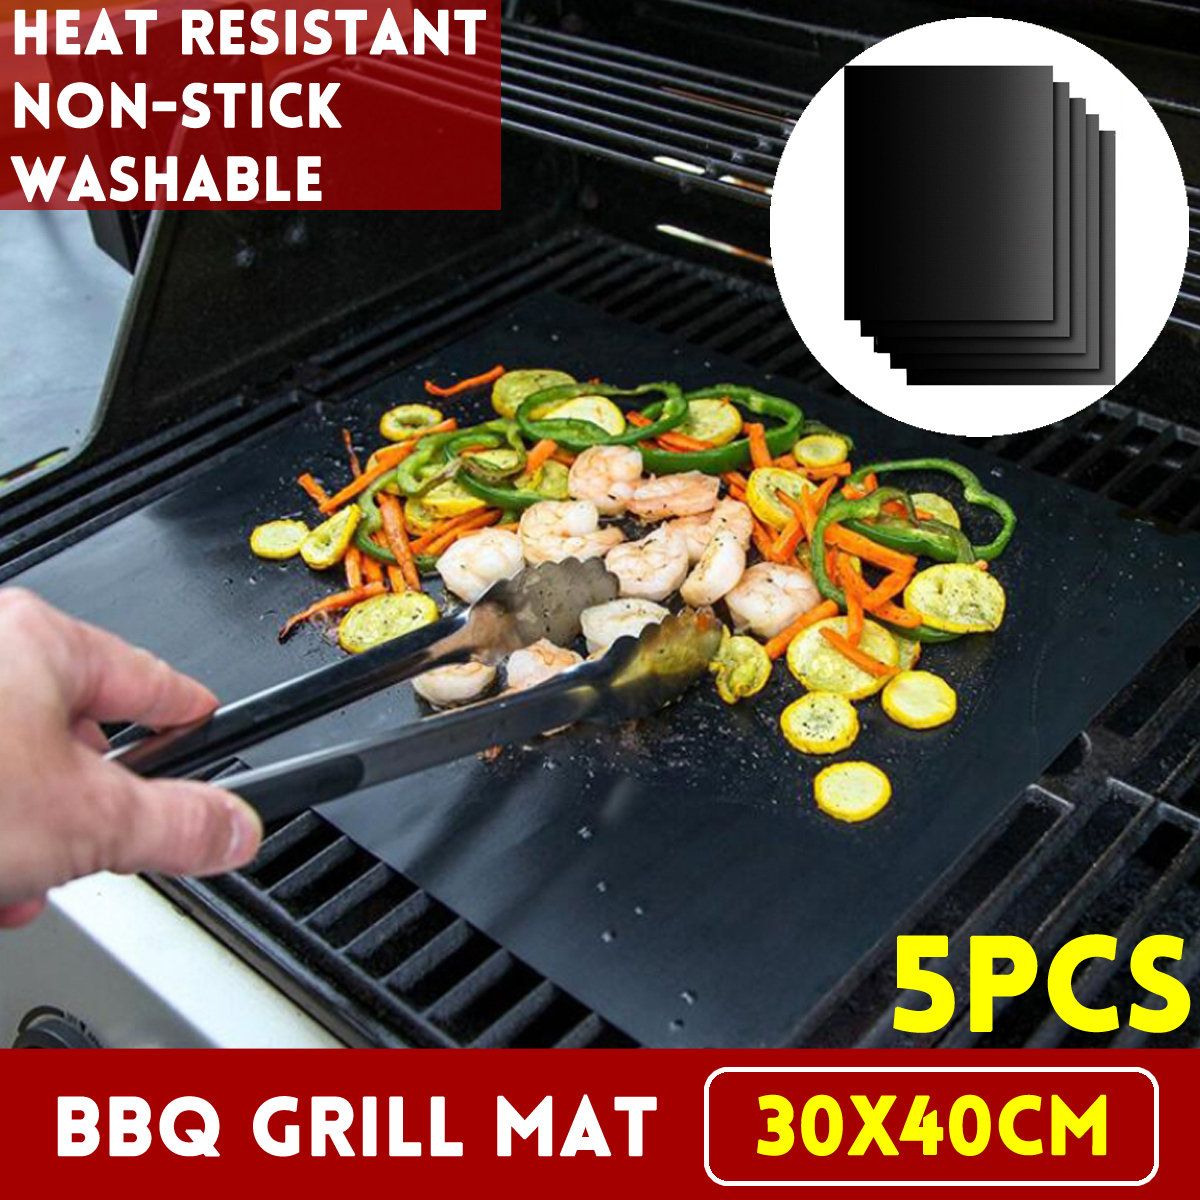 5pcs-BBQ-Grill-Mat-Barbecue-Outdoor-Baking-Non-stick-Pad-Reusable-And-Easy-To-Clean-Cooking-Mat-1698957-4